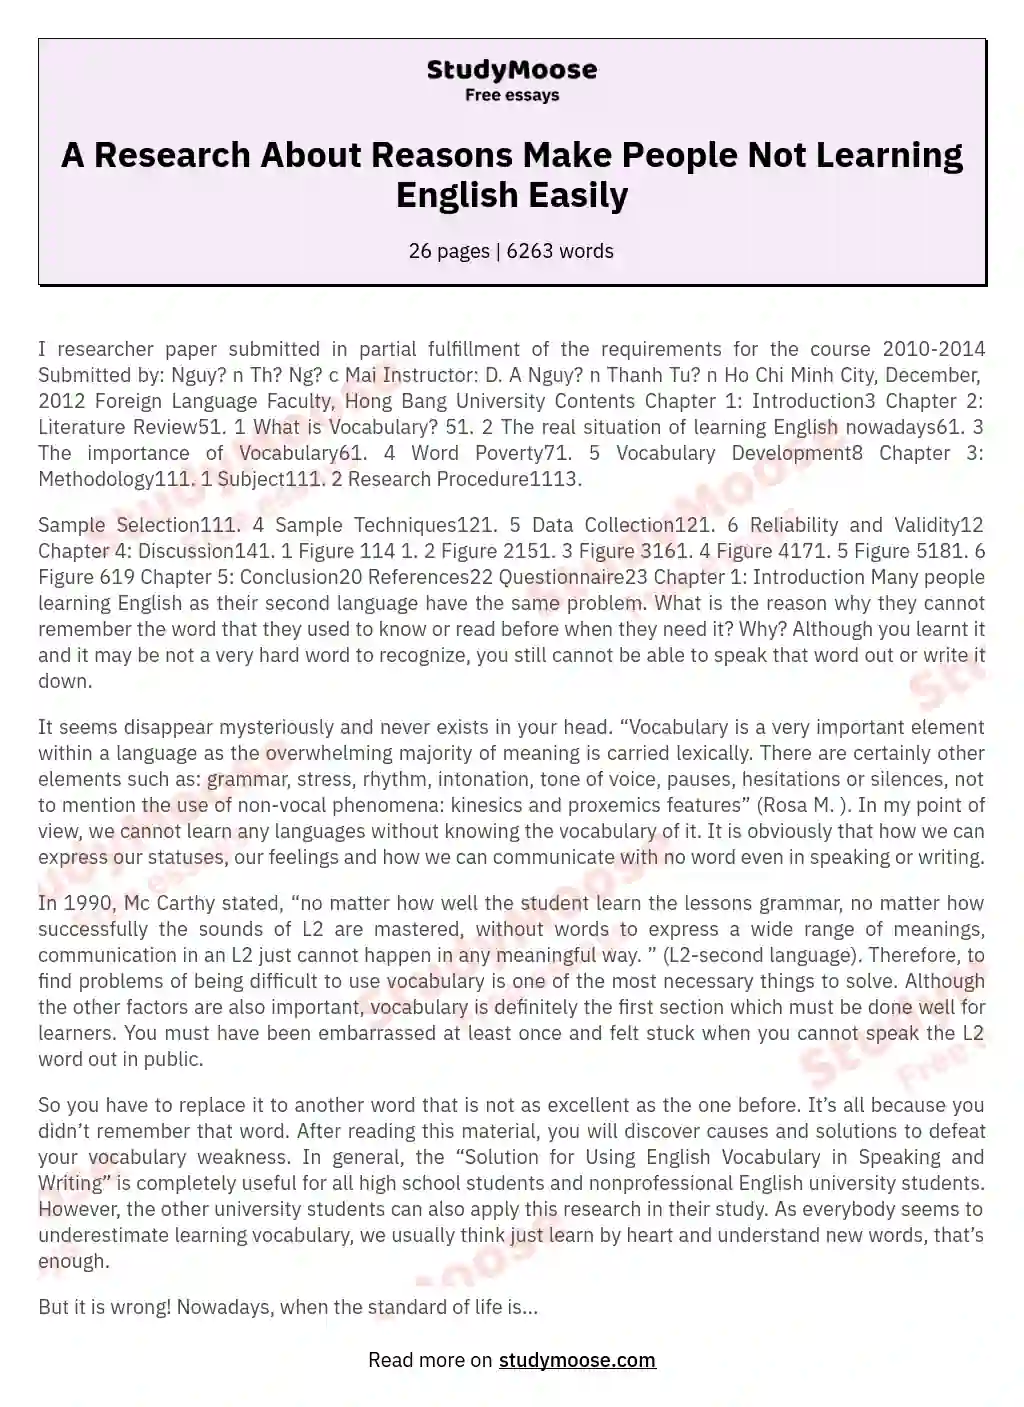 A Research About Reasons Make People Not Learning English Easily essay